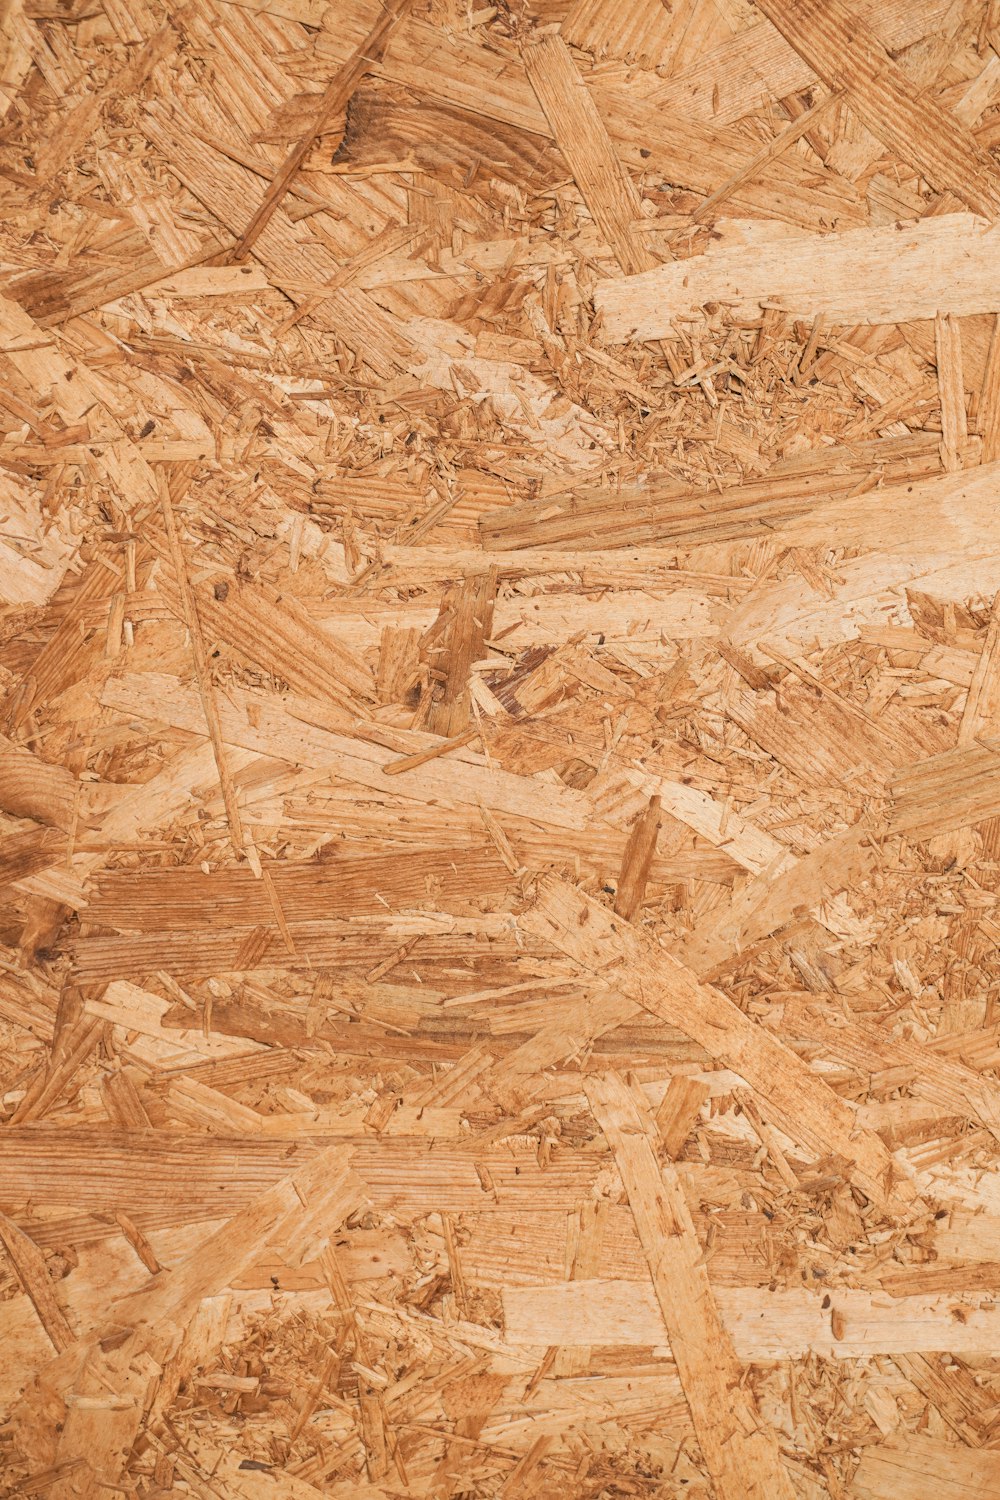 a close up view of a wooden floor